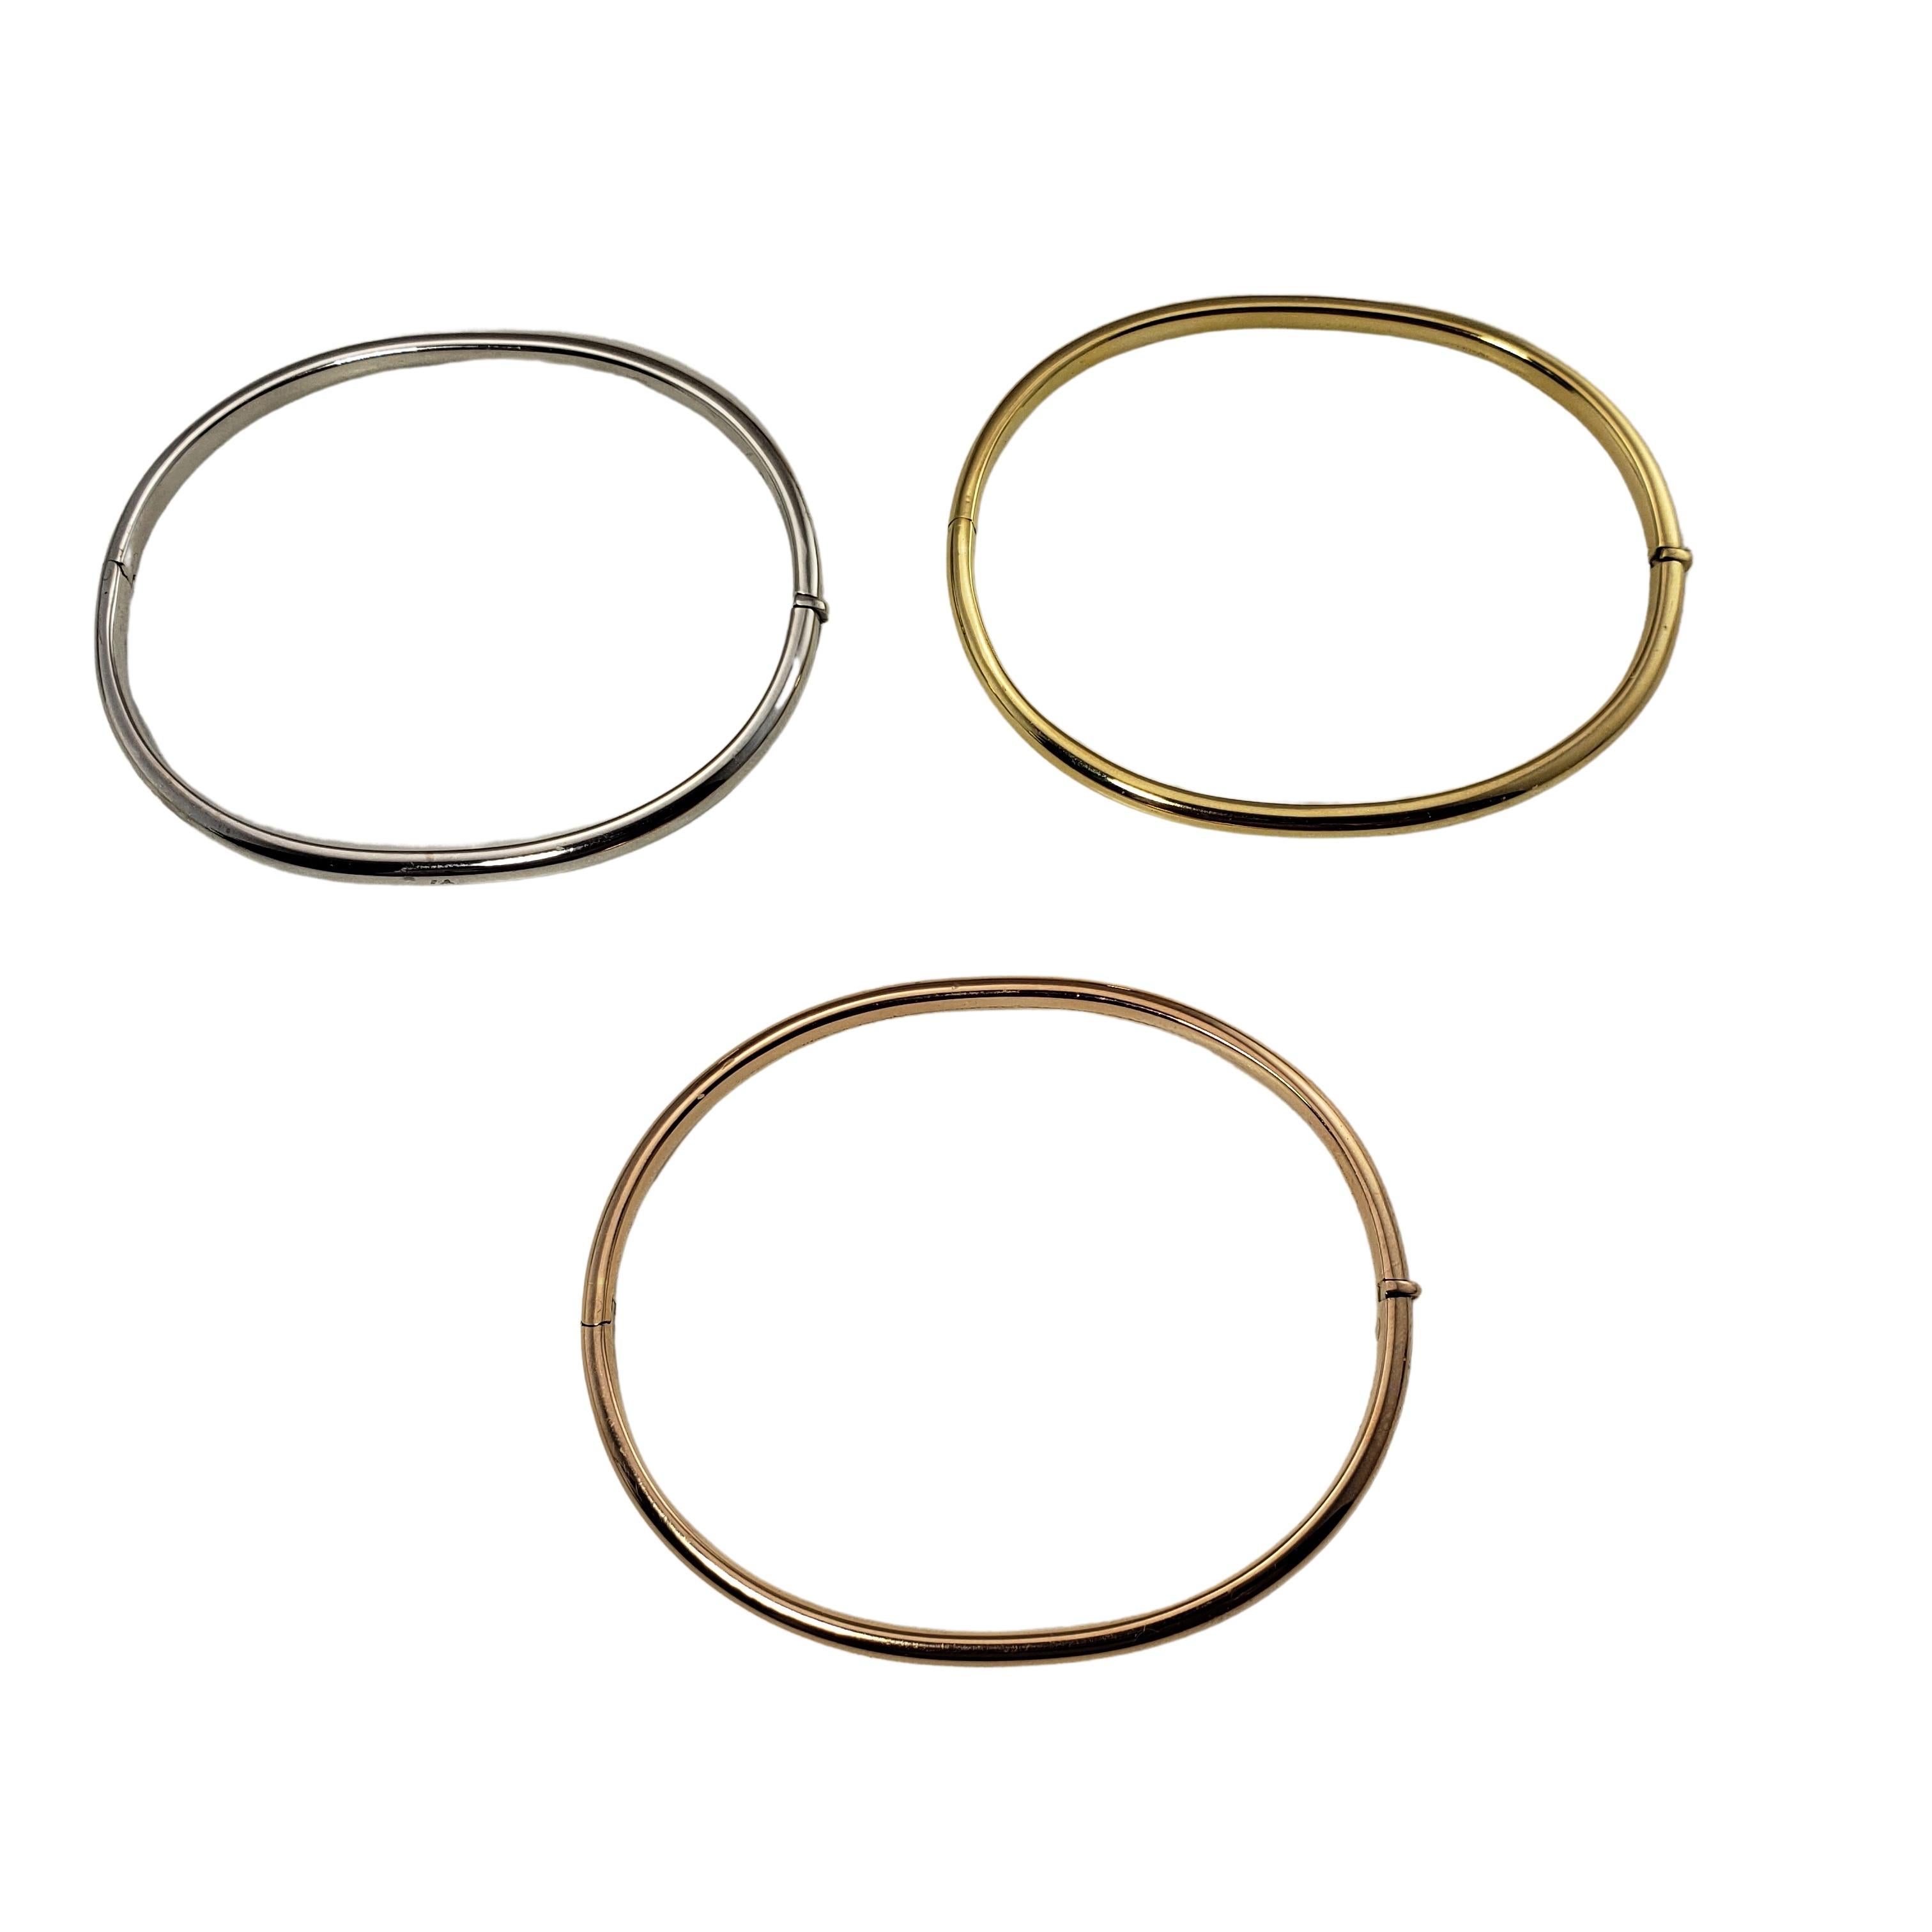 Vintage 18 Karat Yellow, Rose and White Set of 3 Bangle Bracelets-

This elegant set features three hinged bangle bracelets crafted in classic 18K yellow, white and rose gold. Width: 4 mm.

Size: 7.25 inches

Weight: 16.3 dwt. / 25.35 gr.

Stamped: